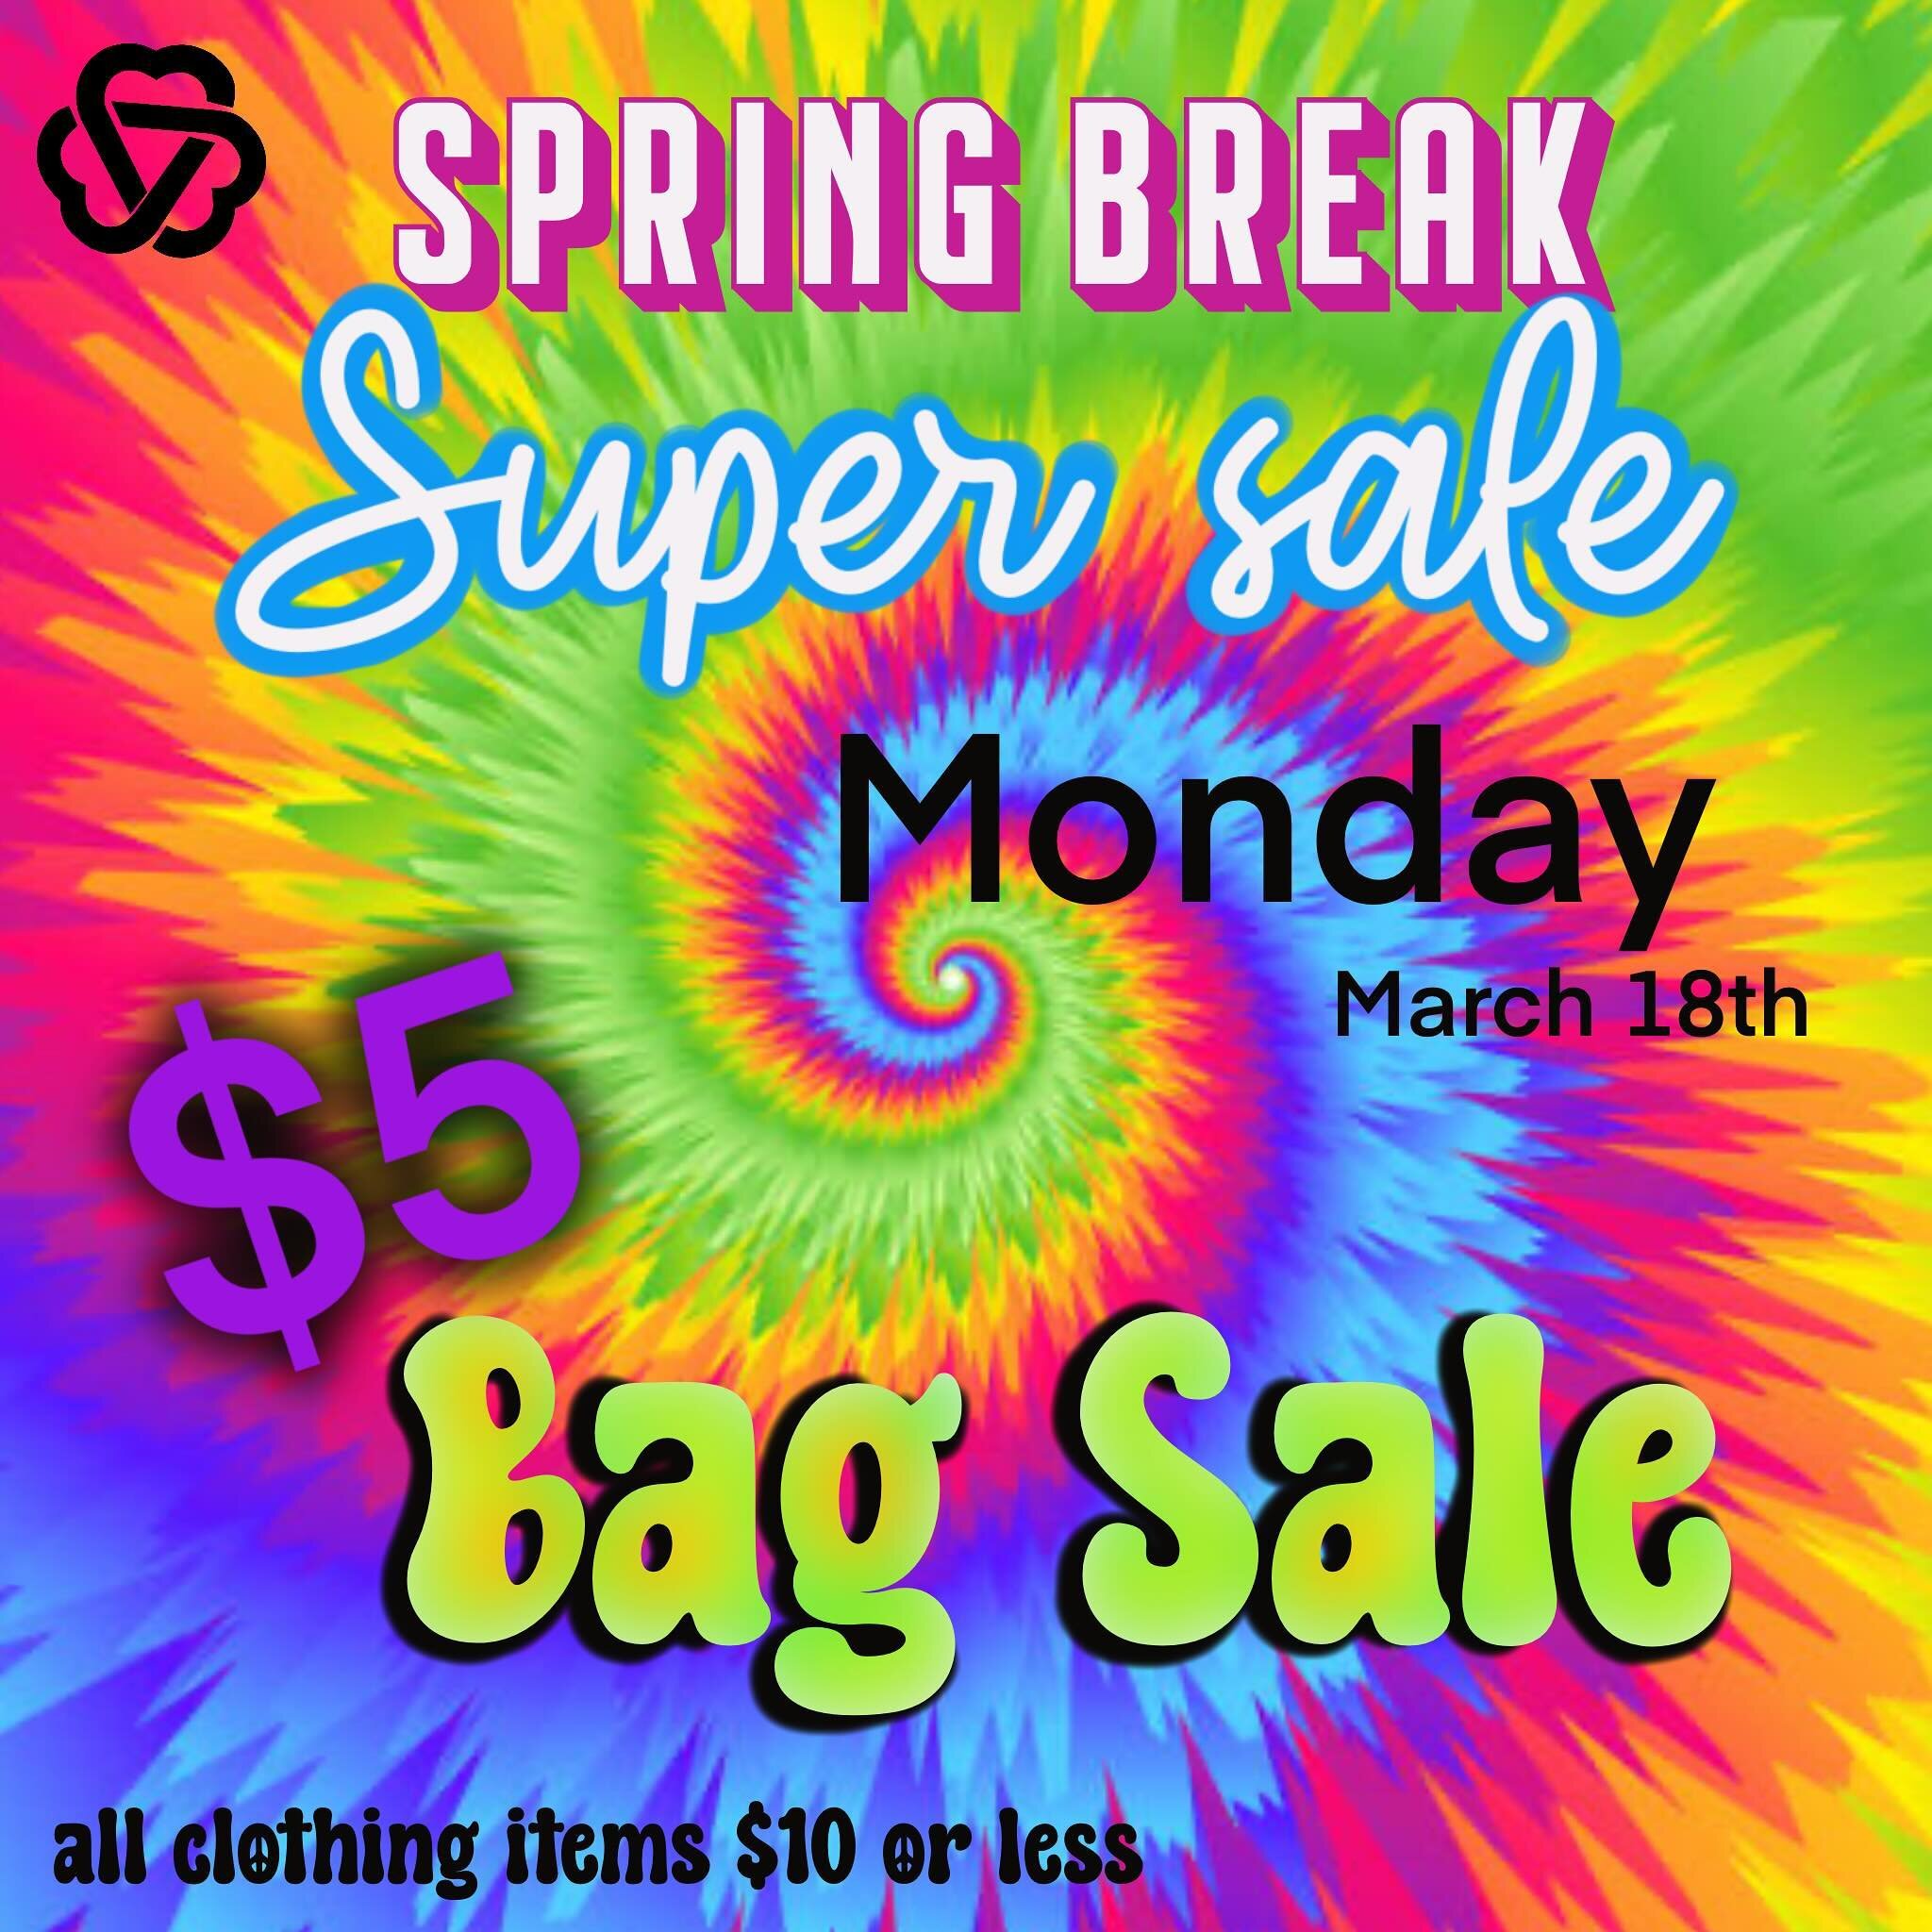 Come by our Muskogee &amp; Tahlequah locations for a $5 bag sale today only!! 

Stop by Wagoner for a $2 item sale!